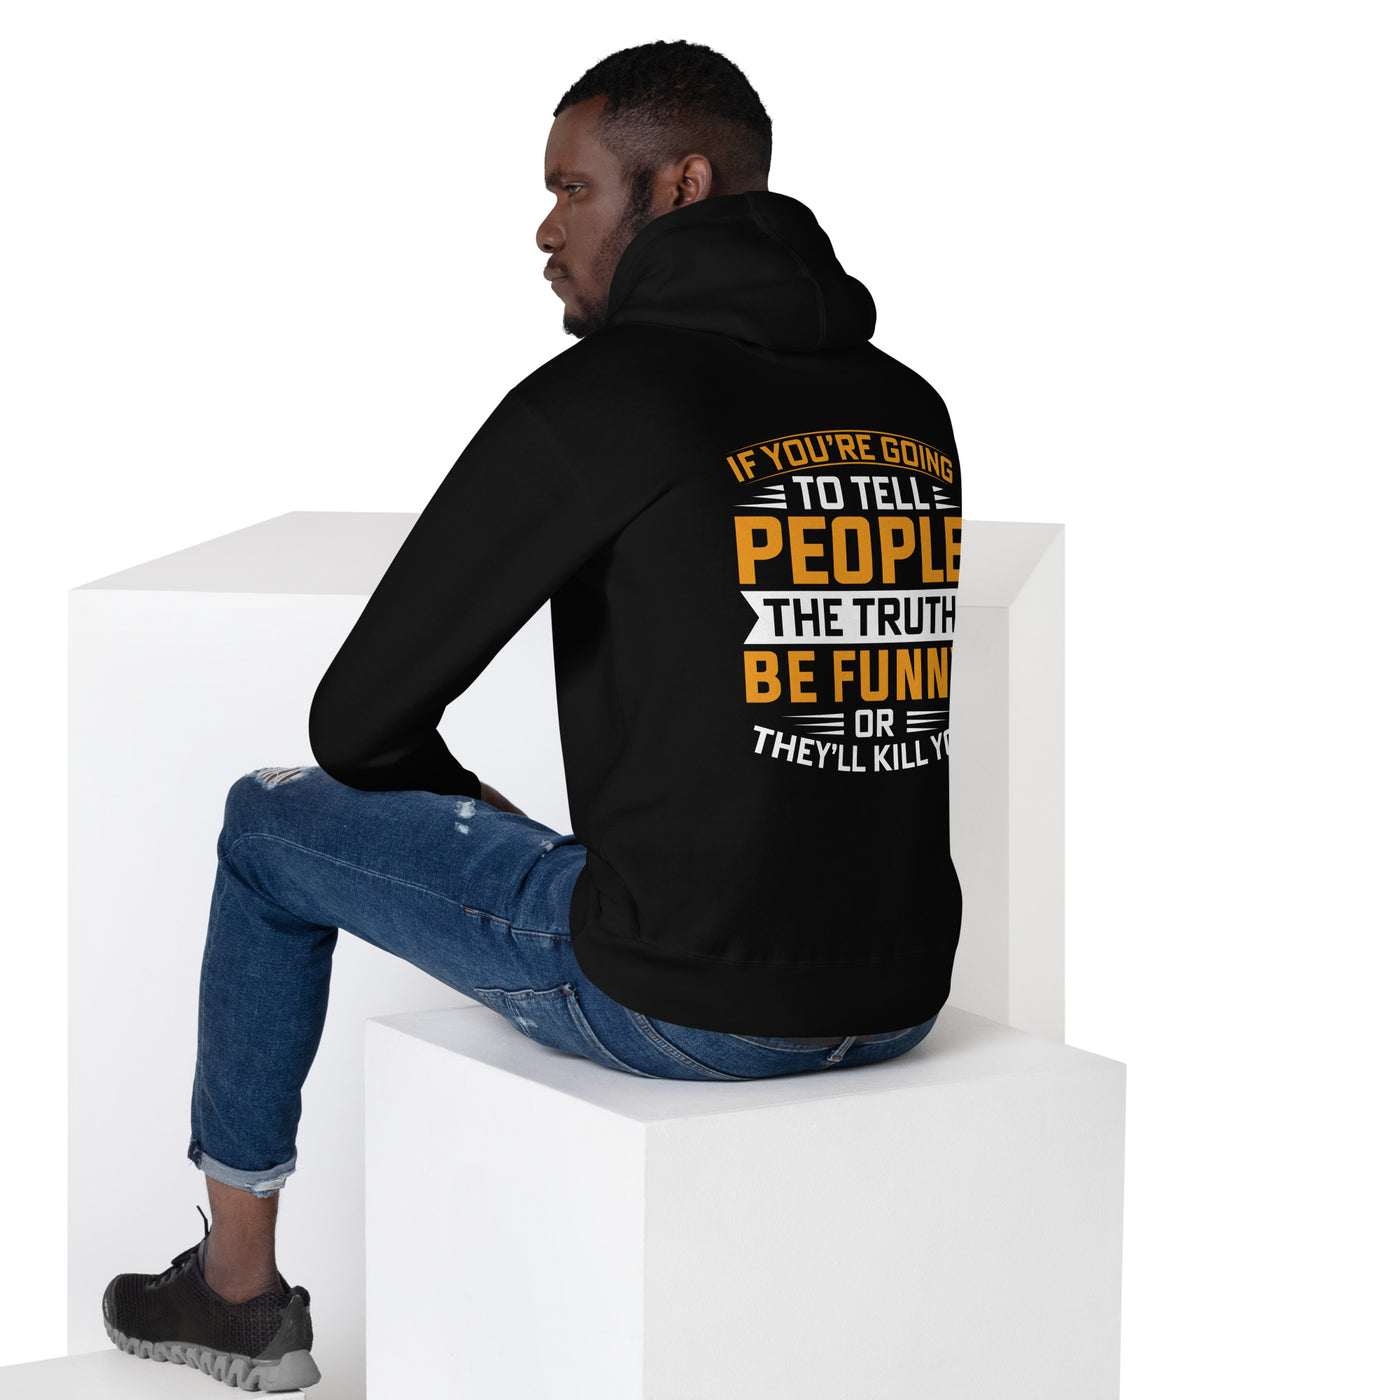 If you are going to tell the people the truth; be funny or they'll kill you - Unisex Hoodie ( Back Print )